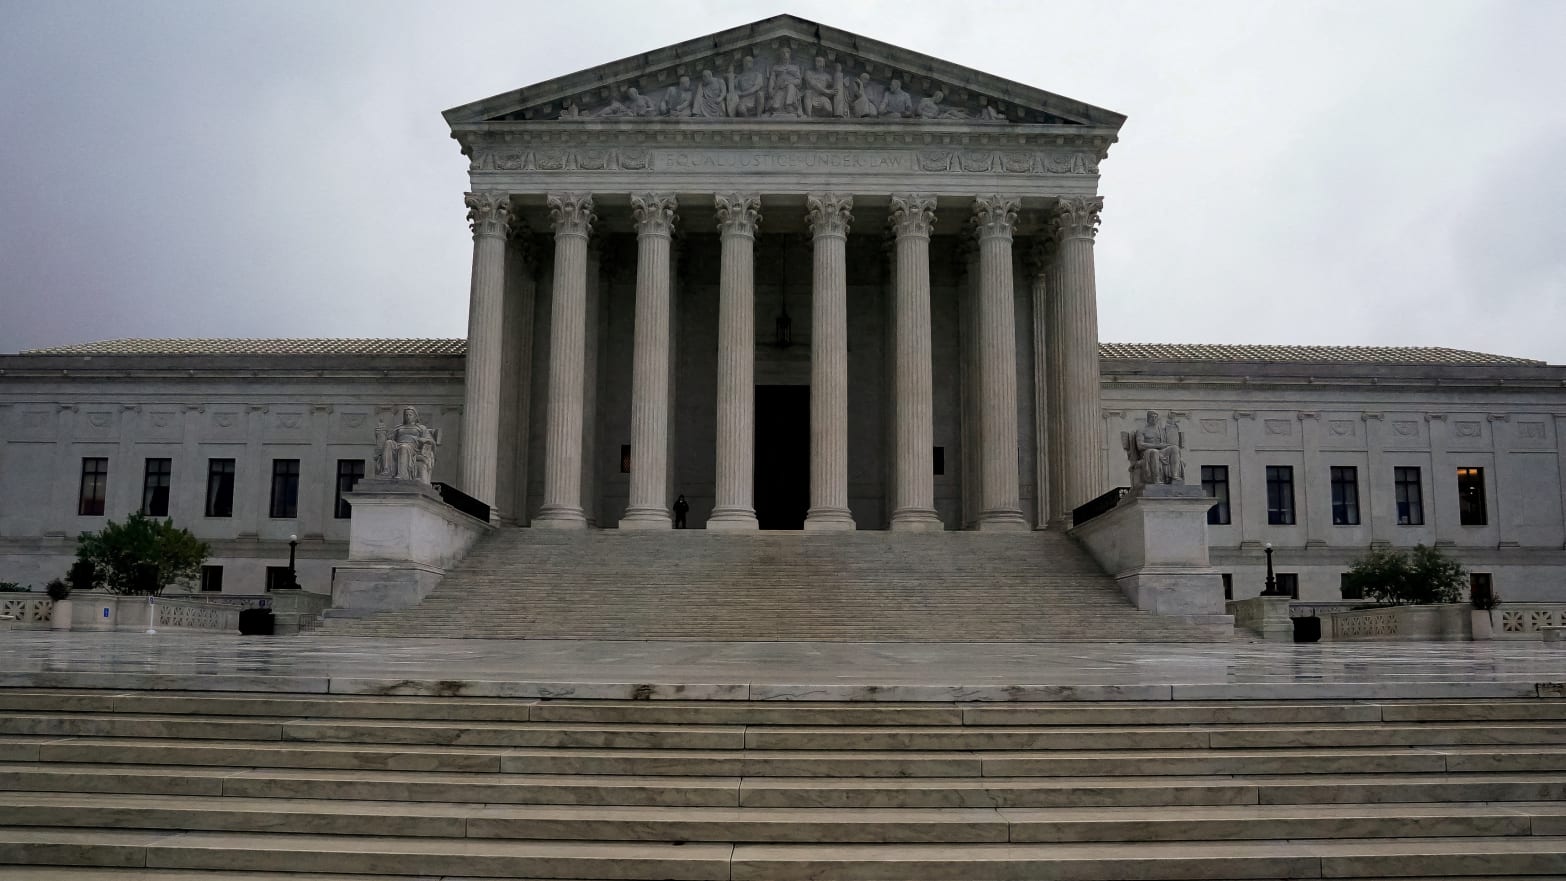 The front entrance to the U.S. Supreme Court in Washington, D.C., in October 2022.